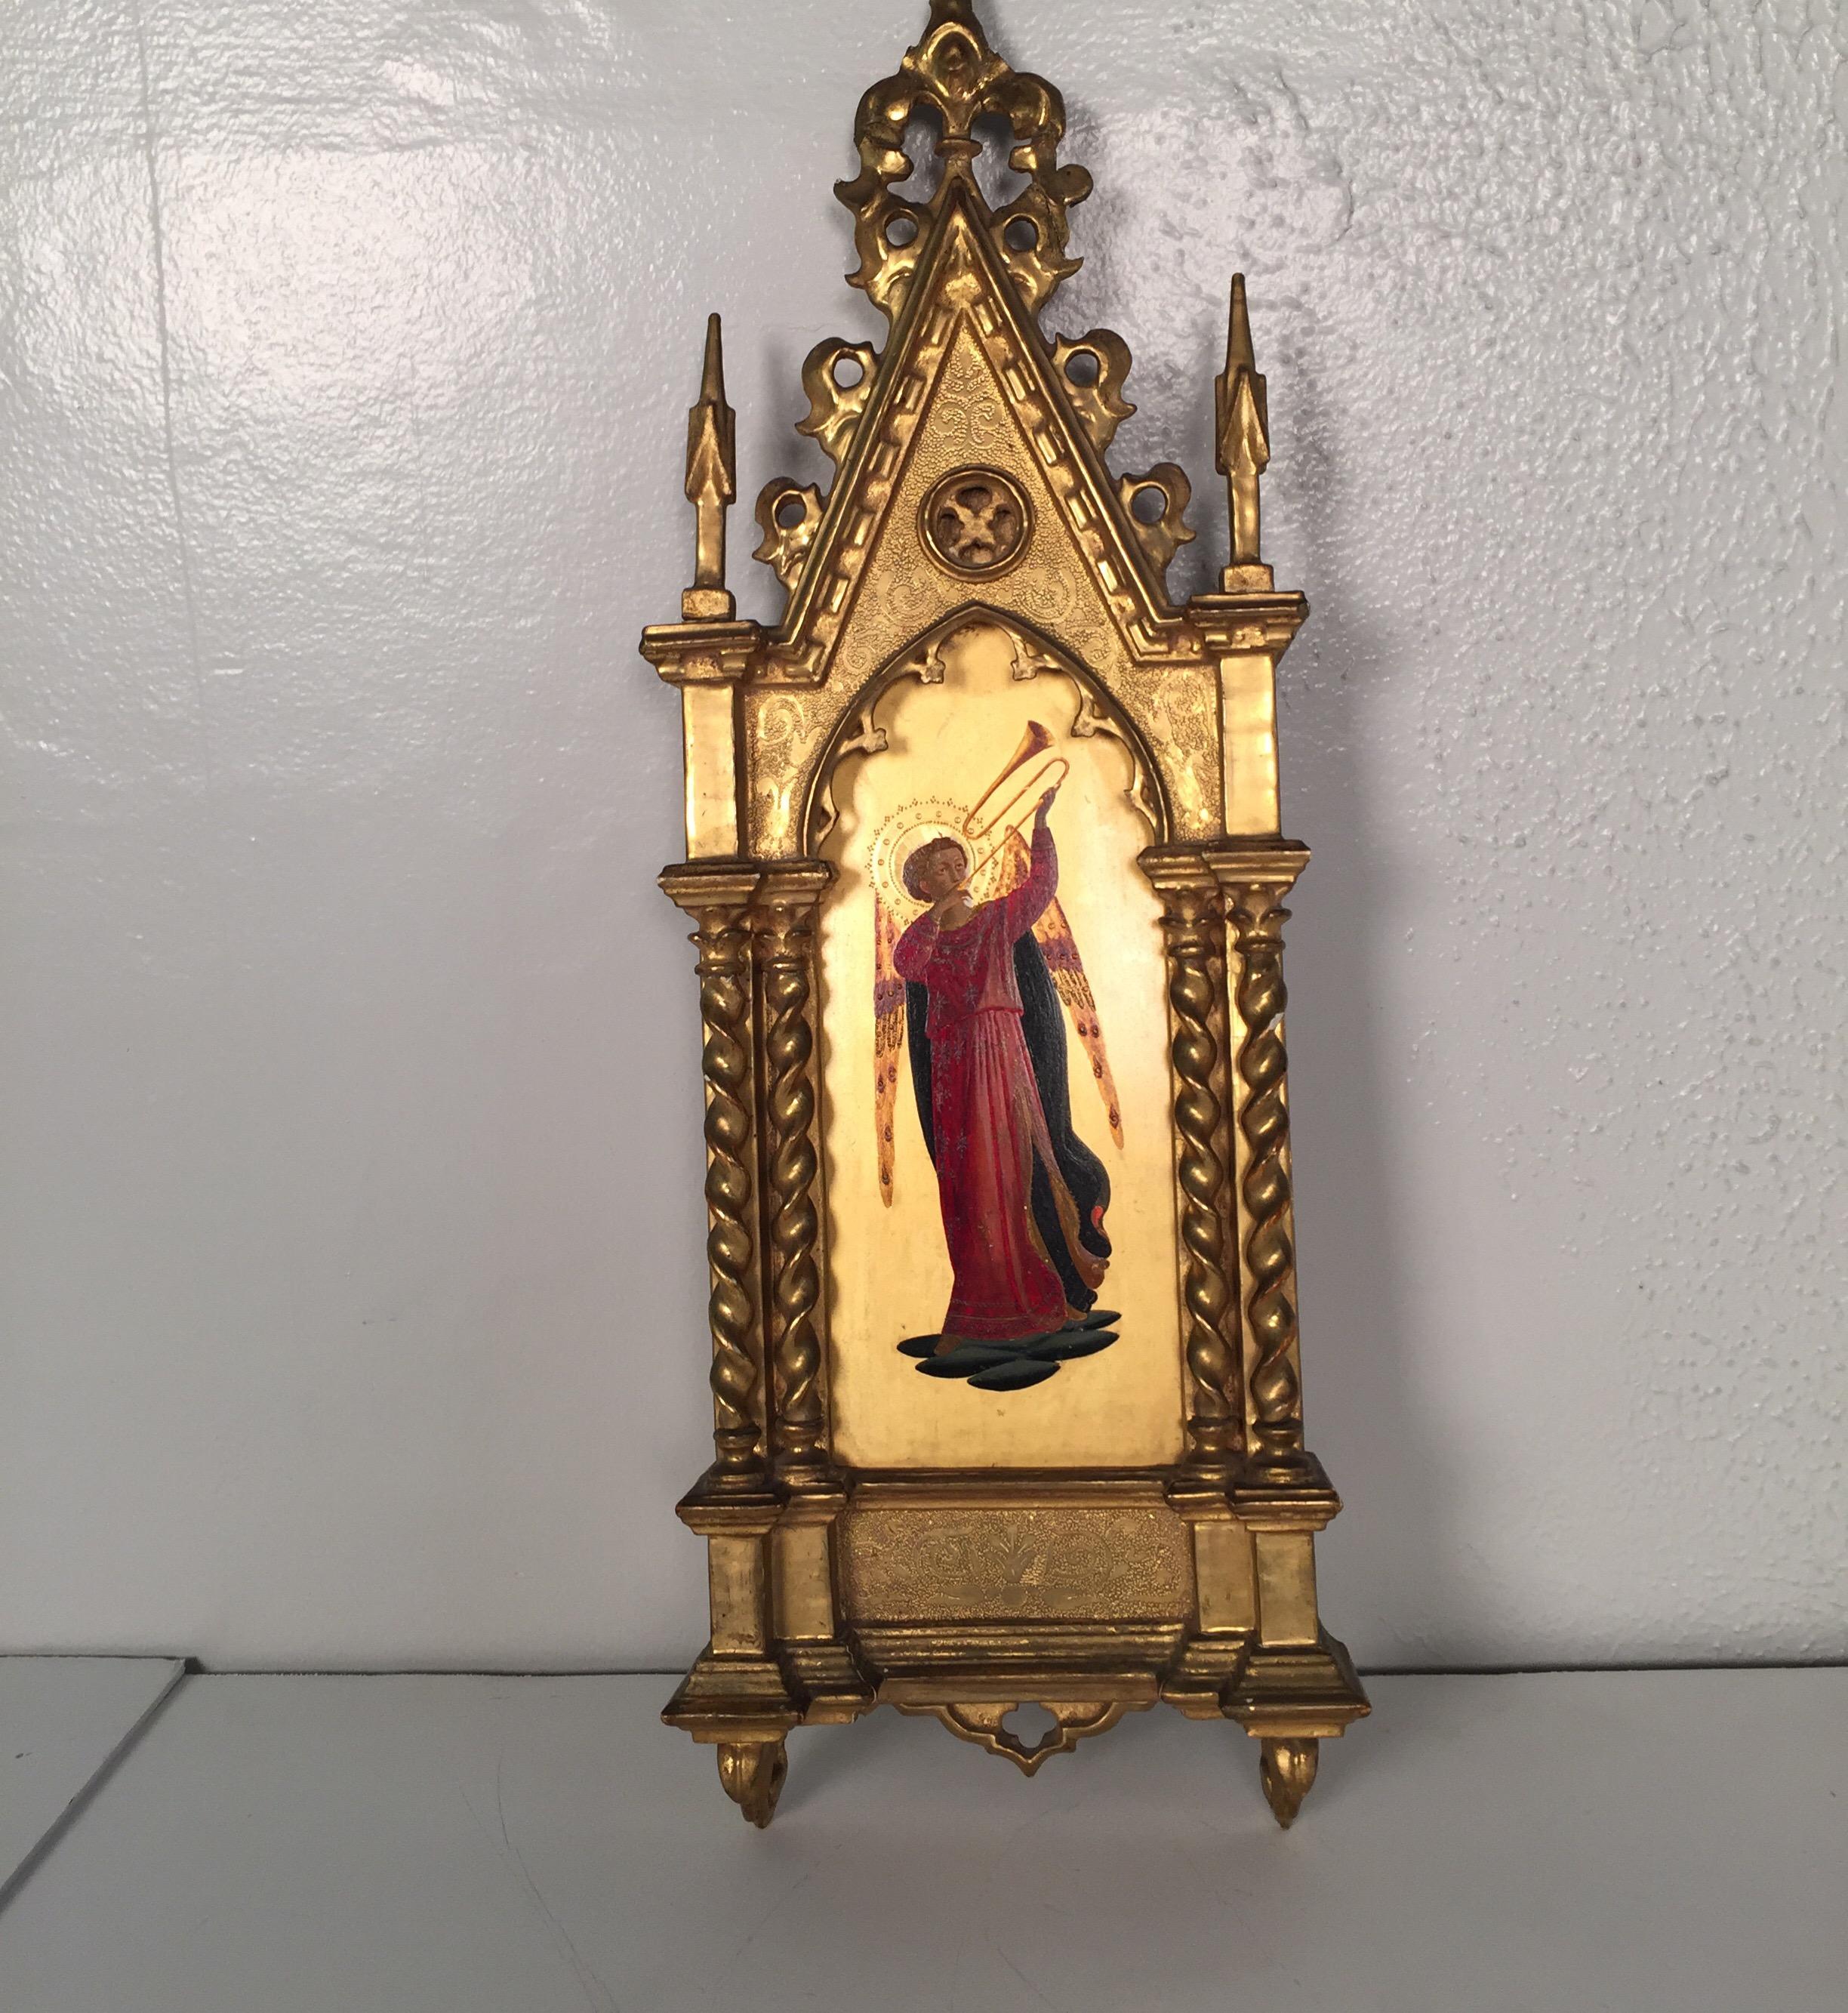 Beautiful painting on board in elaborate Gothic frame of Archangel Gabriel. 19th century Italian in architectural Gothic frame with vibrantly colored depiction of Gabriel with a gilt background.